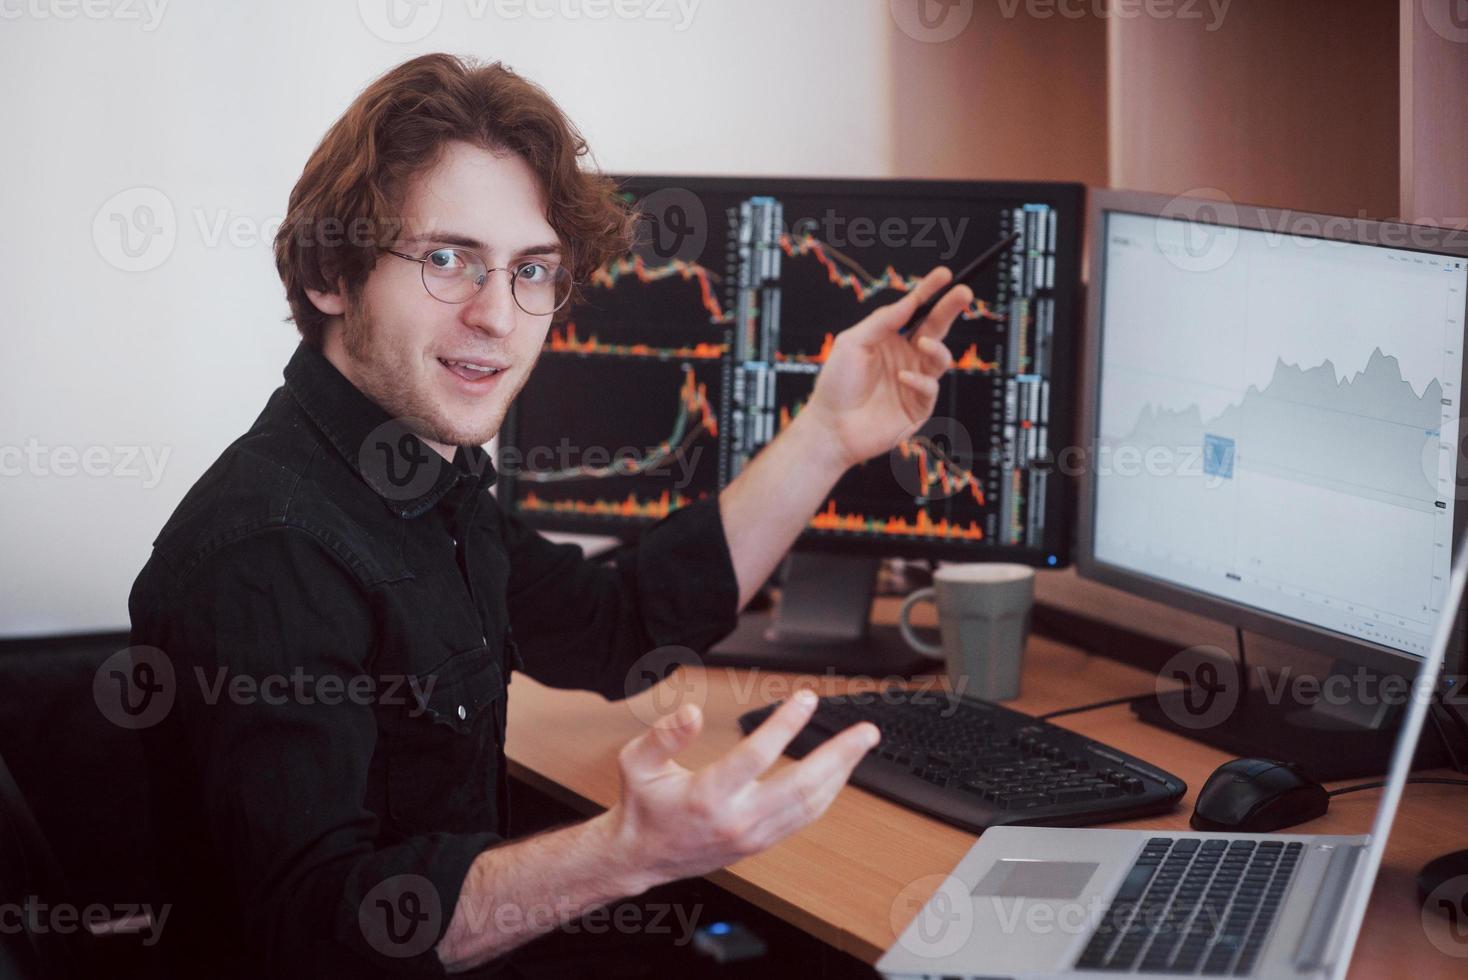 Businessmen trading stocks online. Stock broker looking at graphs, indexes and numbers on multiple computer screens. Business success concept photo